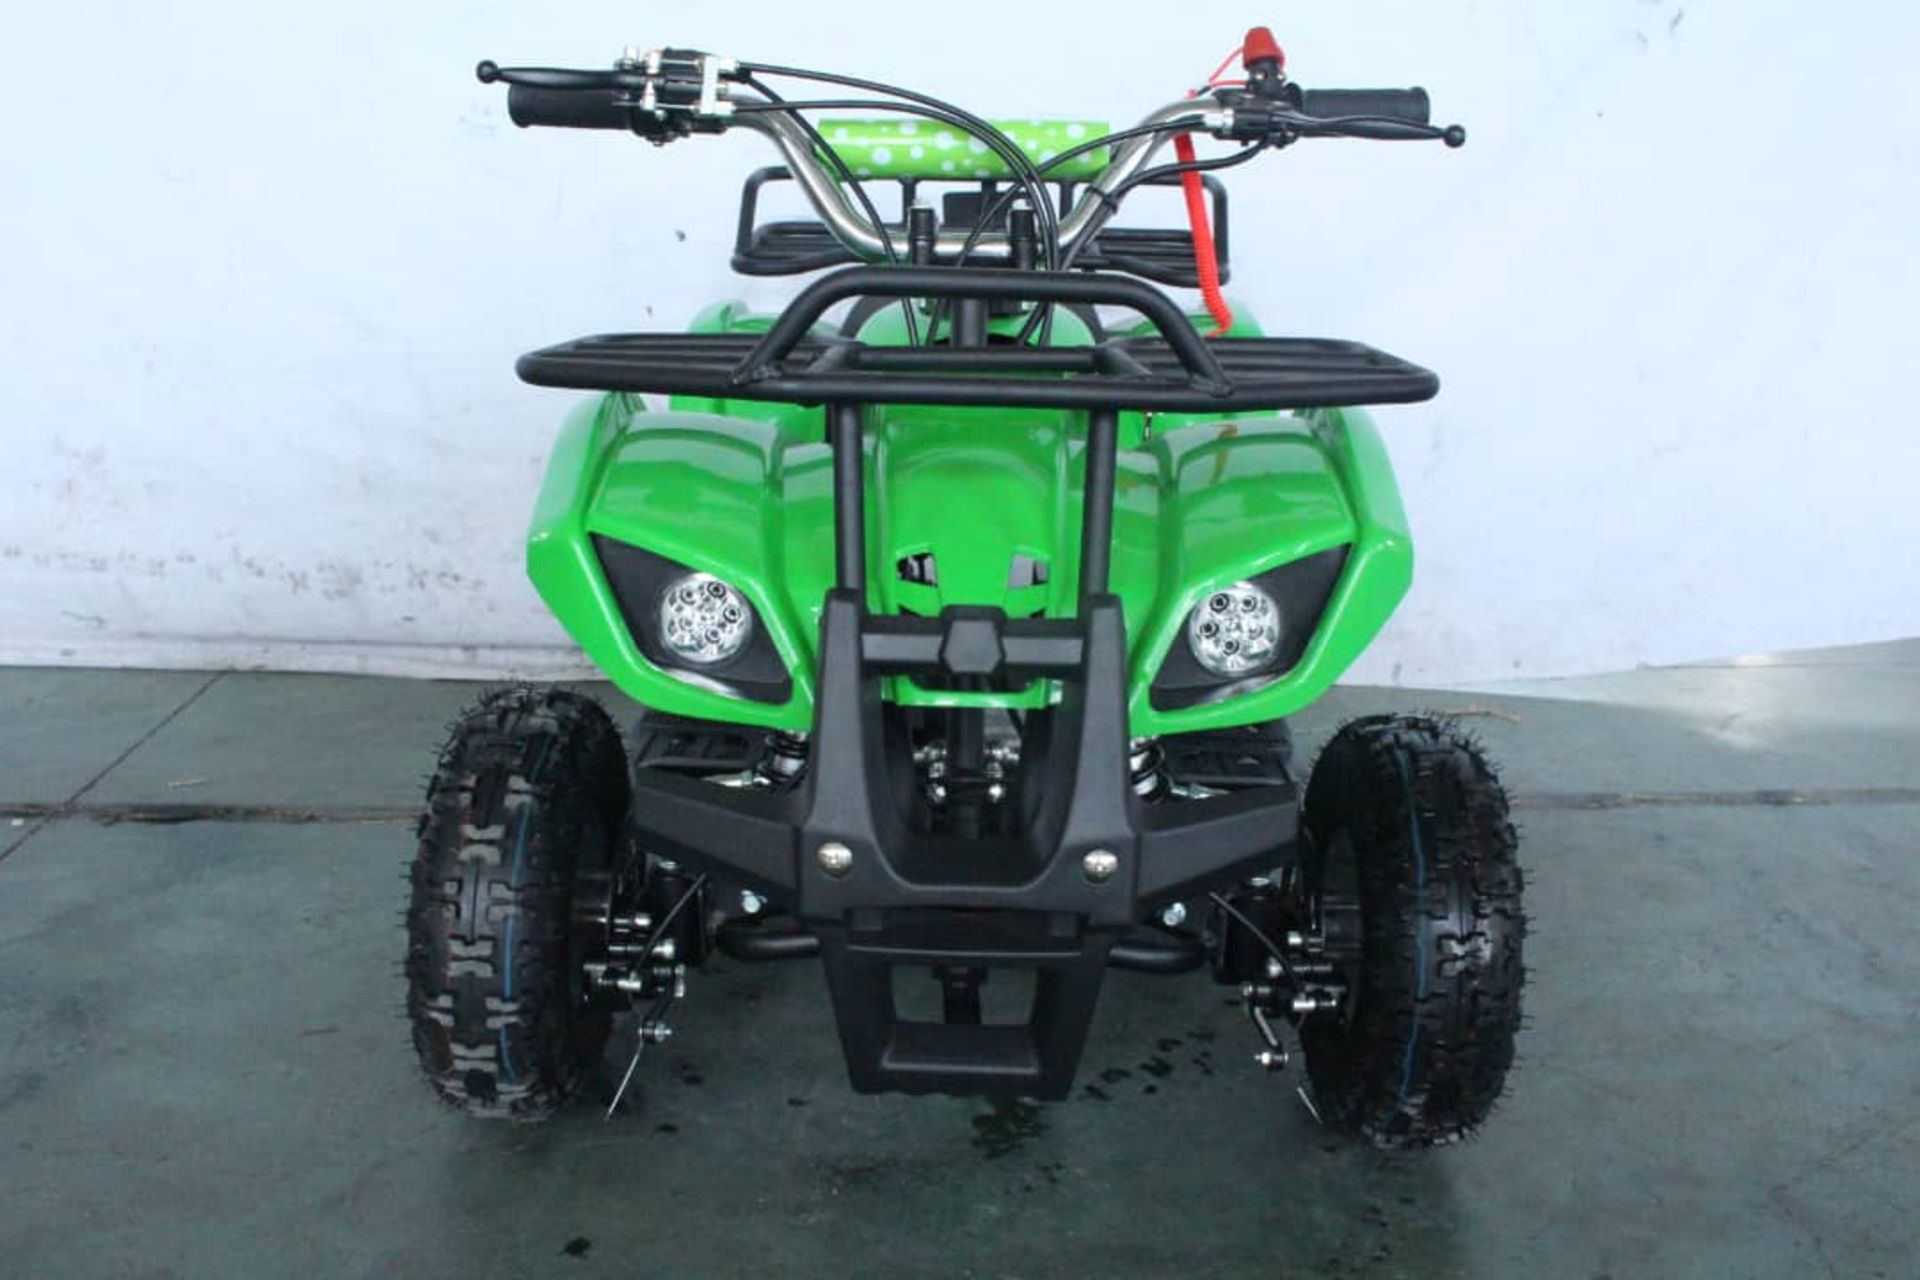 + VAT Brand New 49cc Hawk Mini Quad Bike - Colours May Vary - Full Front And Rear Suspension - Disk - Image 9 of 9